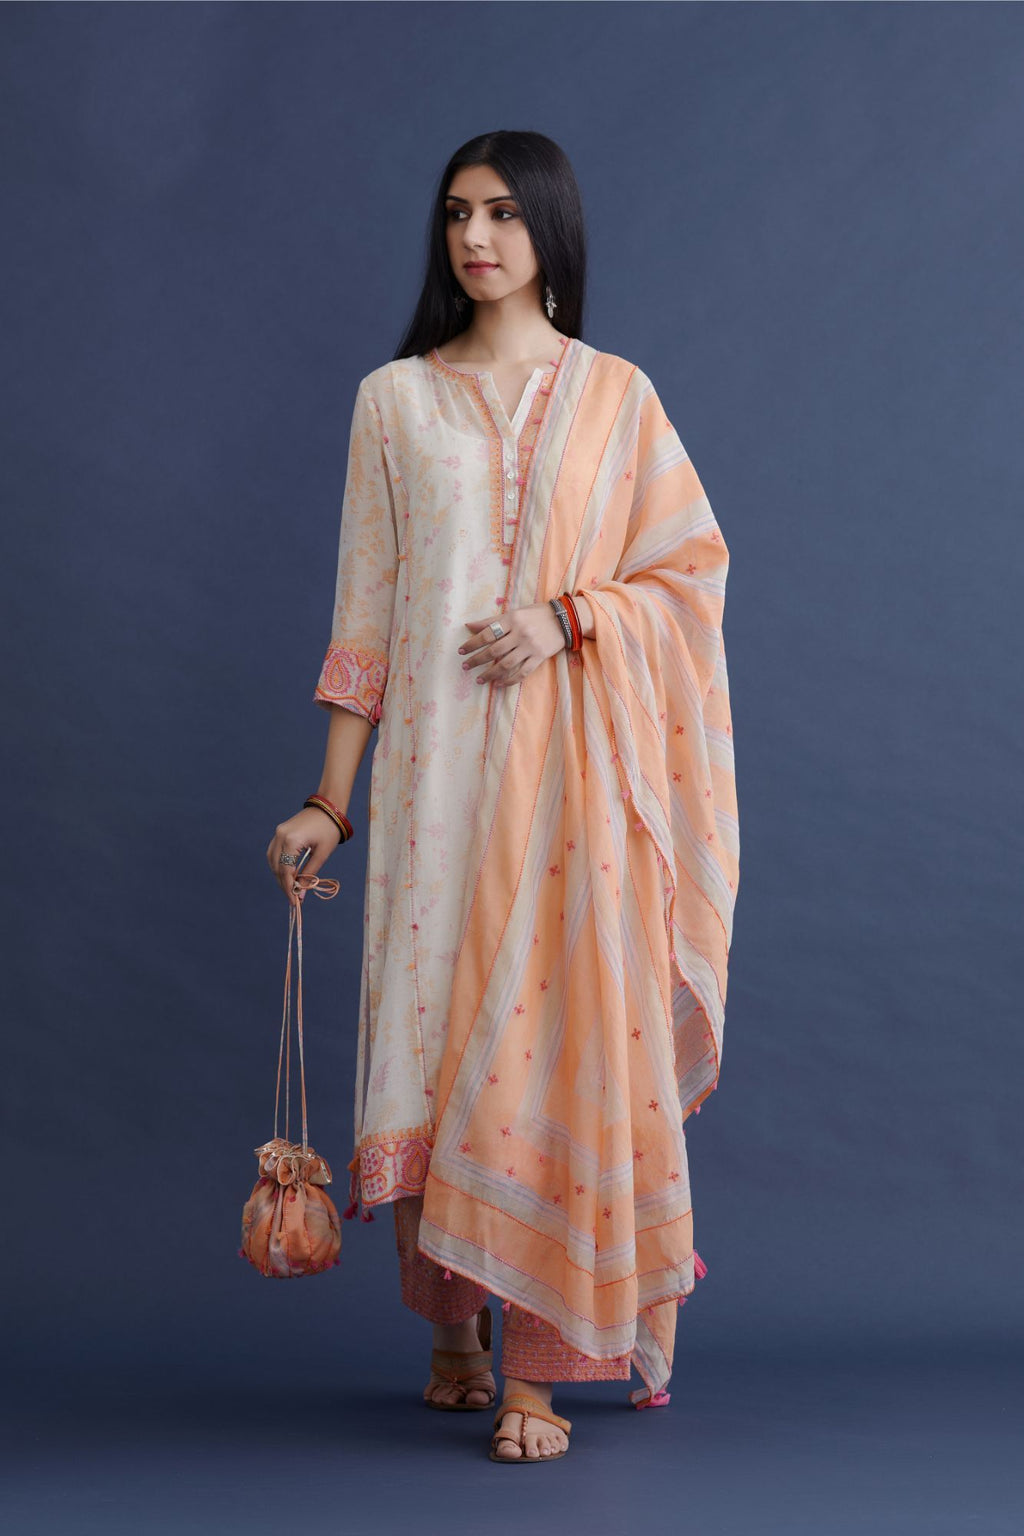 Off white straight kurta set with embroidered button placket neckline and delicate bead and tassel embroidery at side panel joint seams